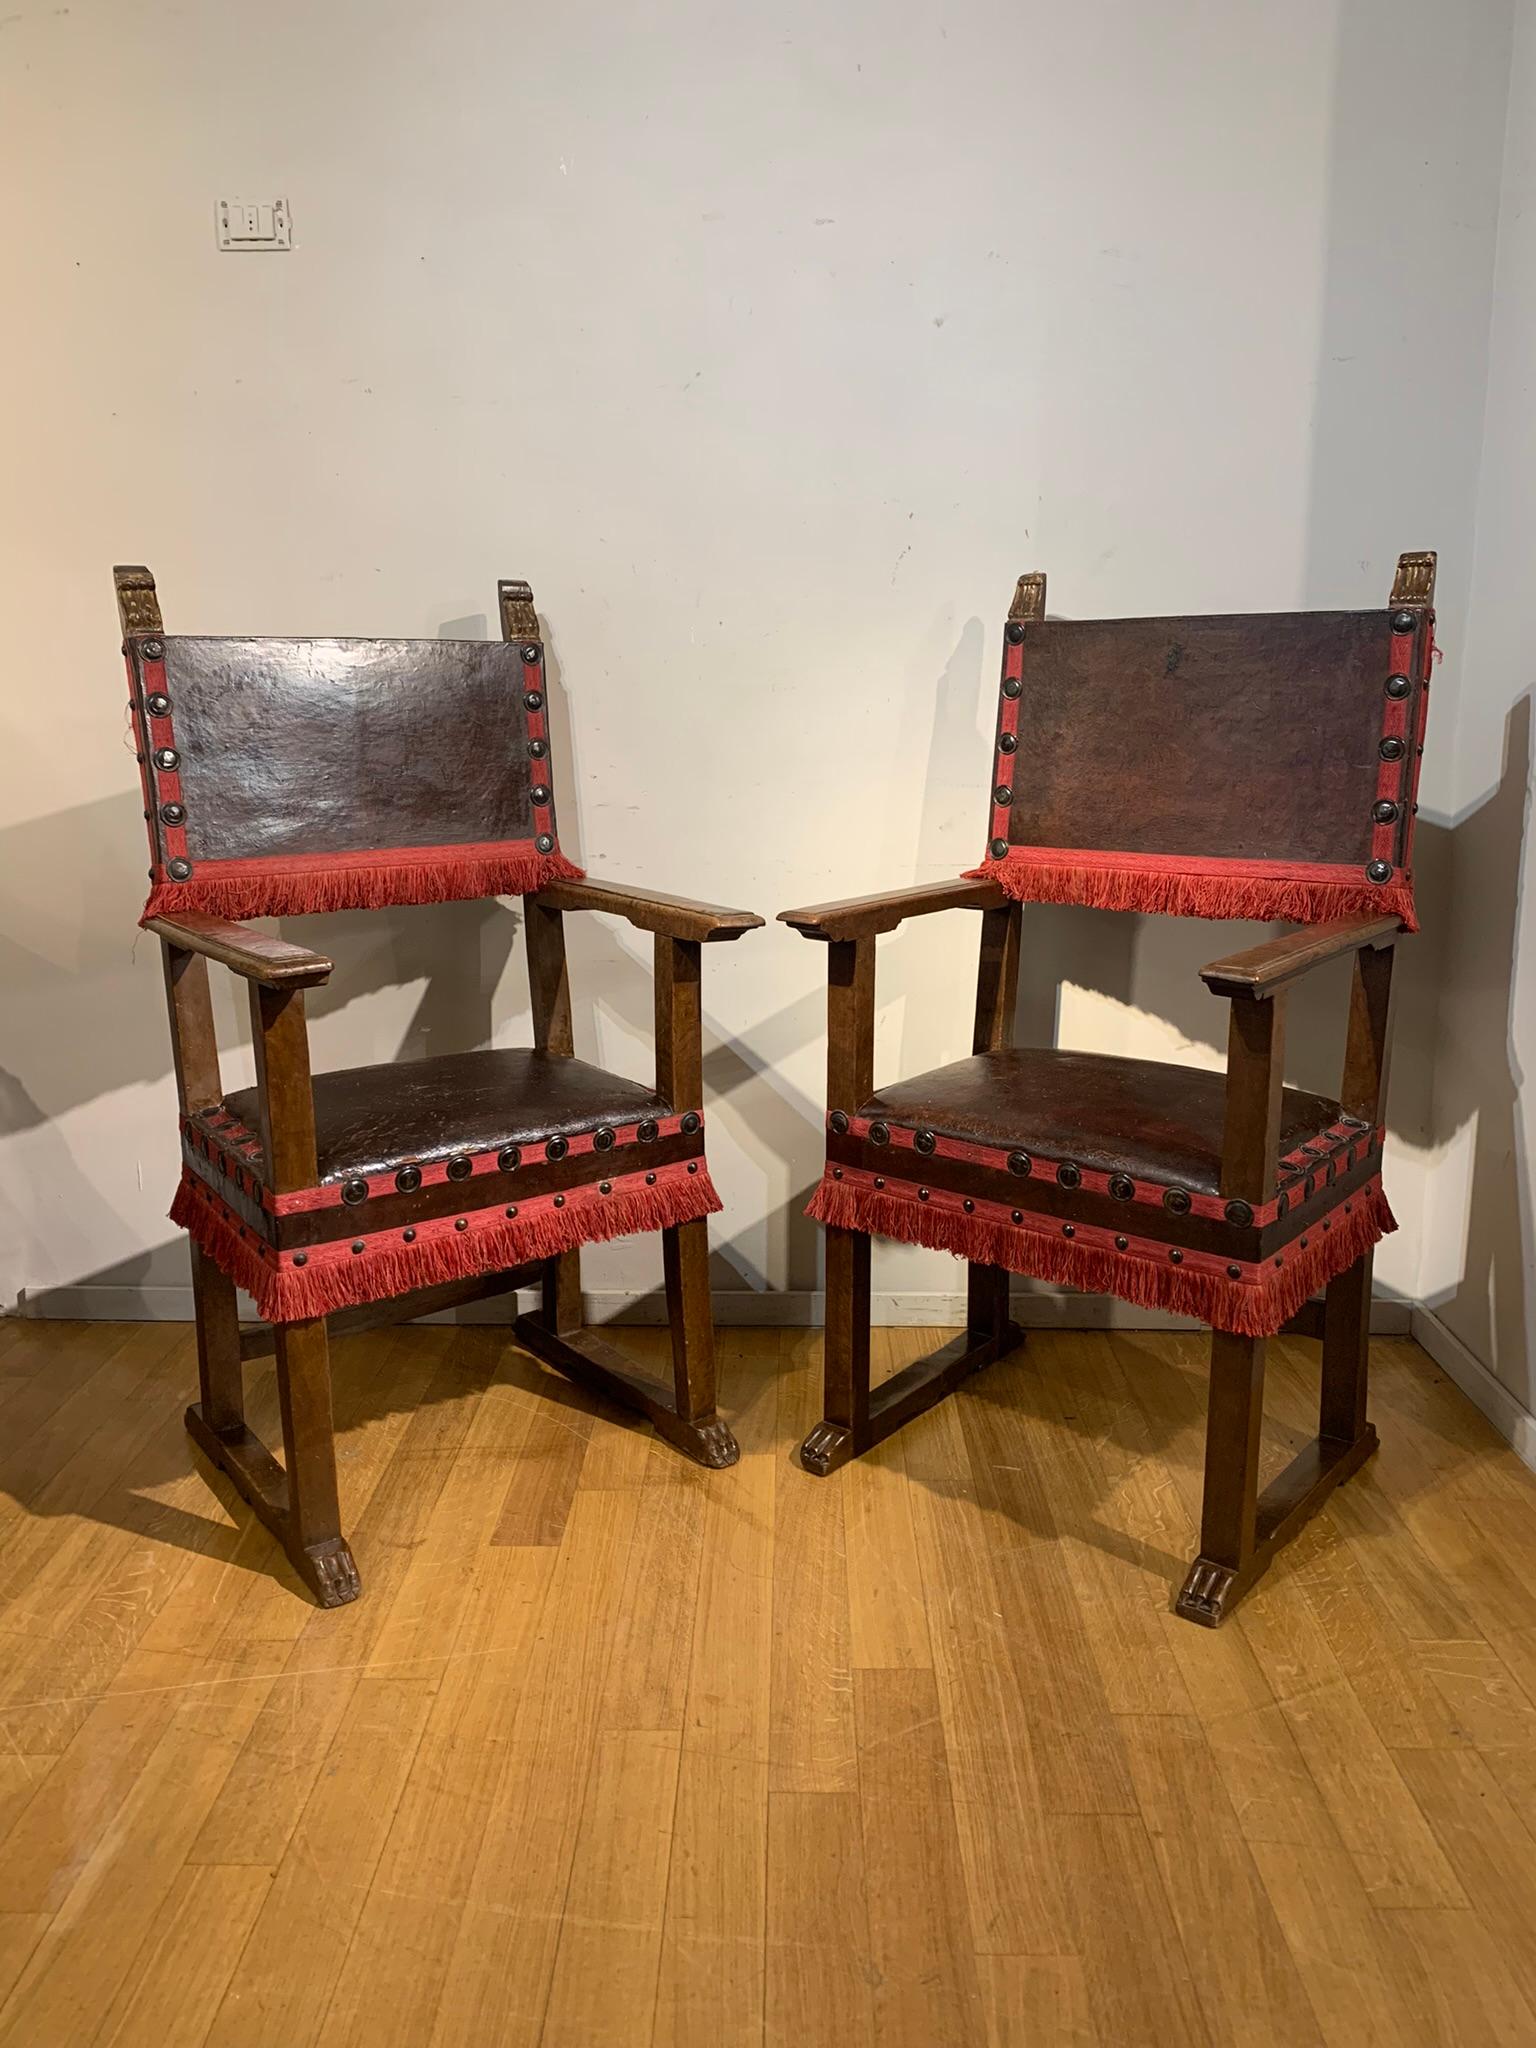 Beautiful pair of thrones for men and women, therefore with slightly different seats, in carved and partially gilded solid walnut.
Typical Florentine manufacture very linear and spartan with straight seats and armrests.
The upholstery is in dark